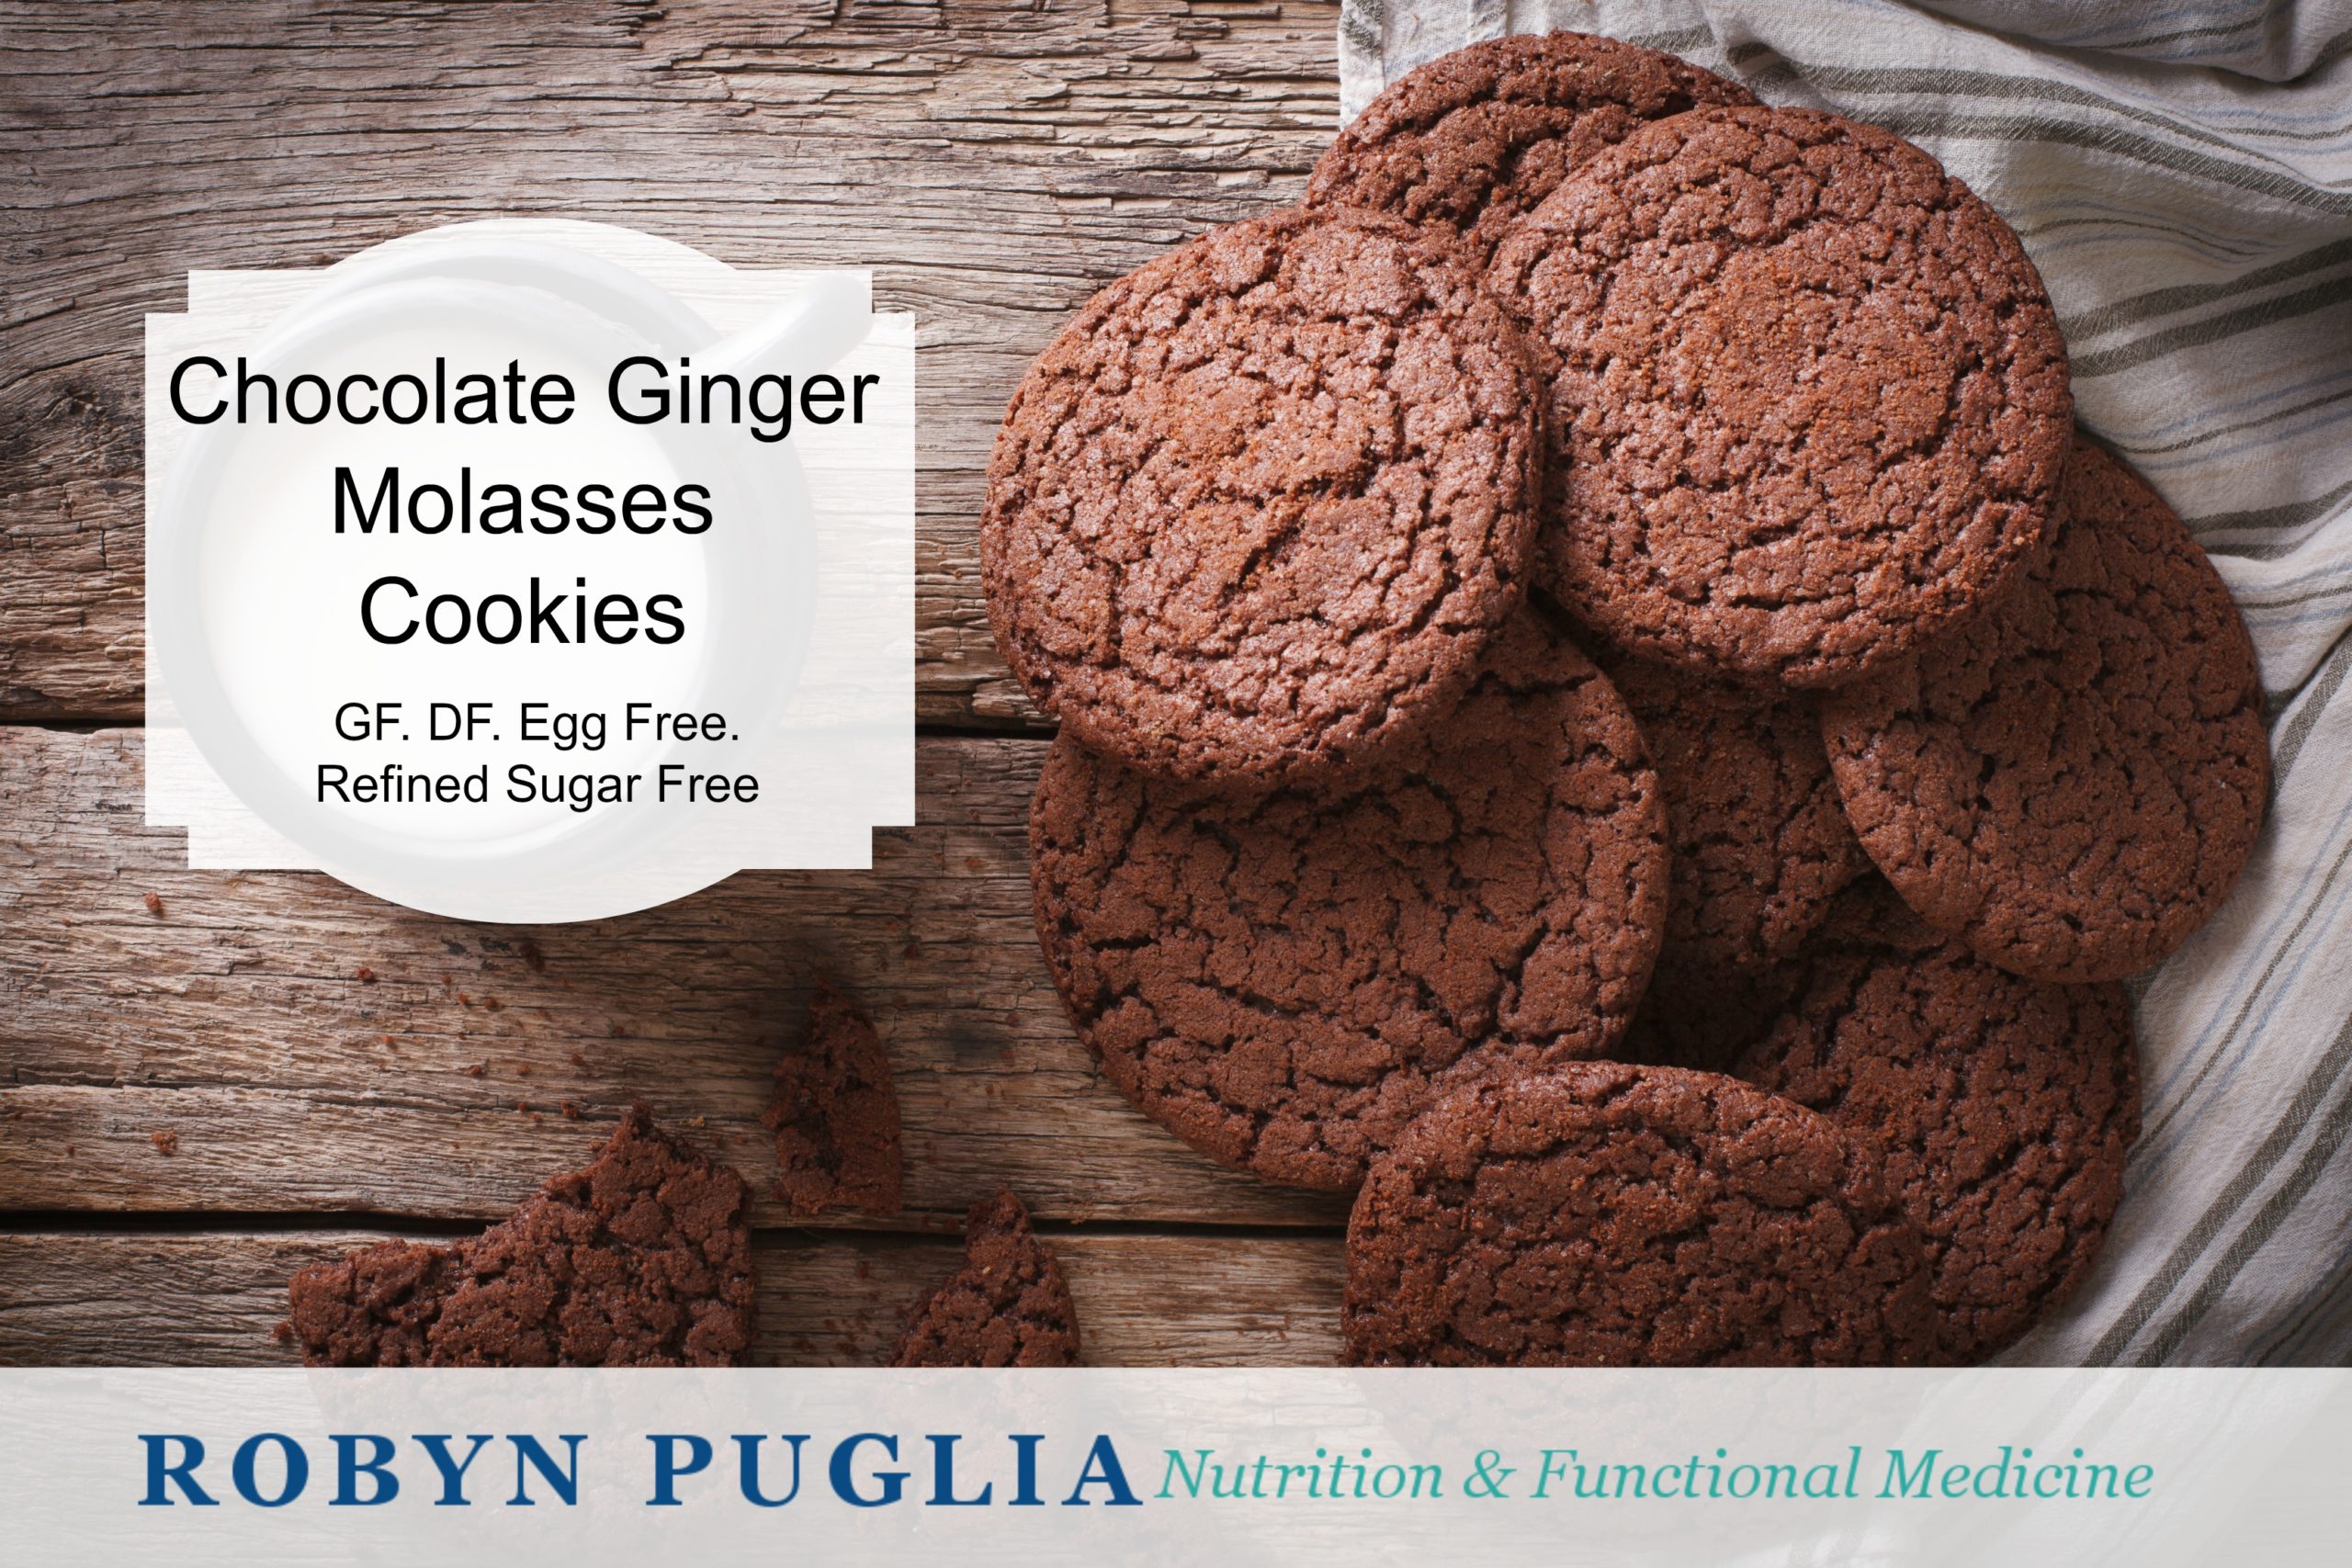 Chocolate-Ginger Molasses Cookies